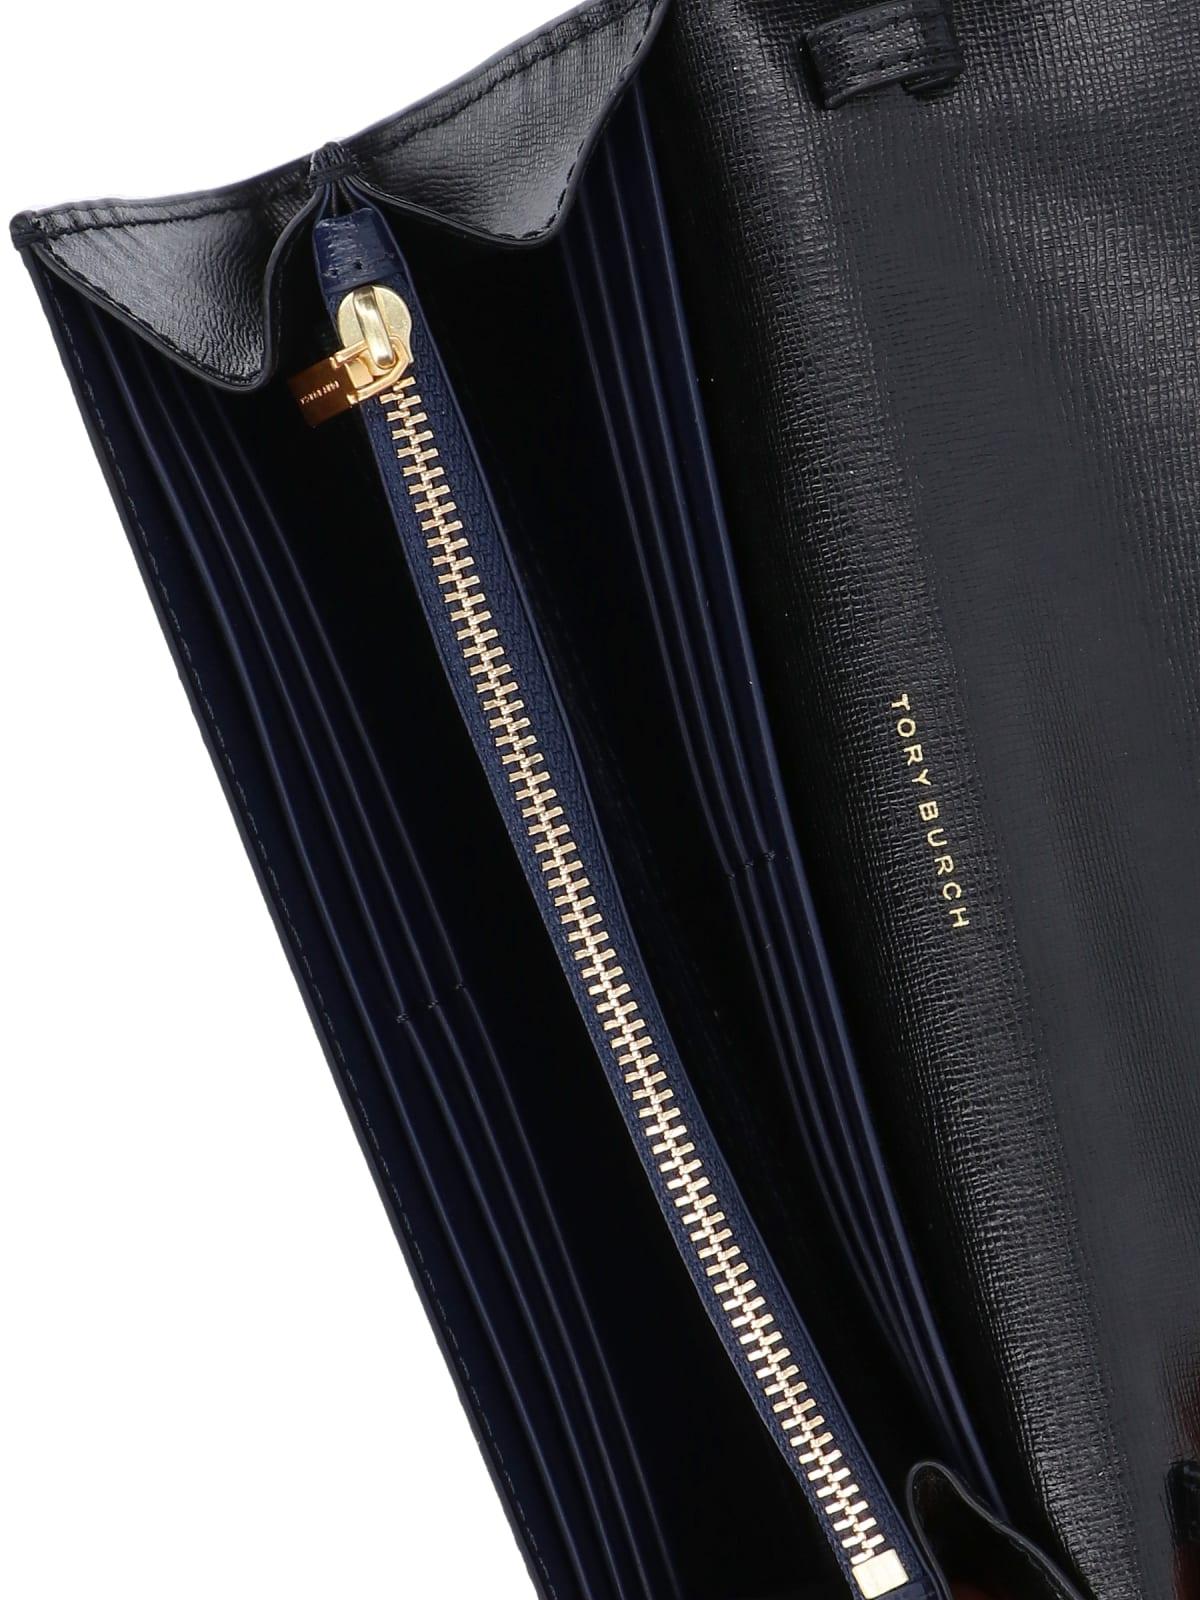 Tory Burch Patent Leather Continental Wallet in Black